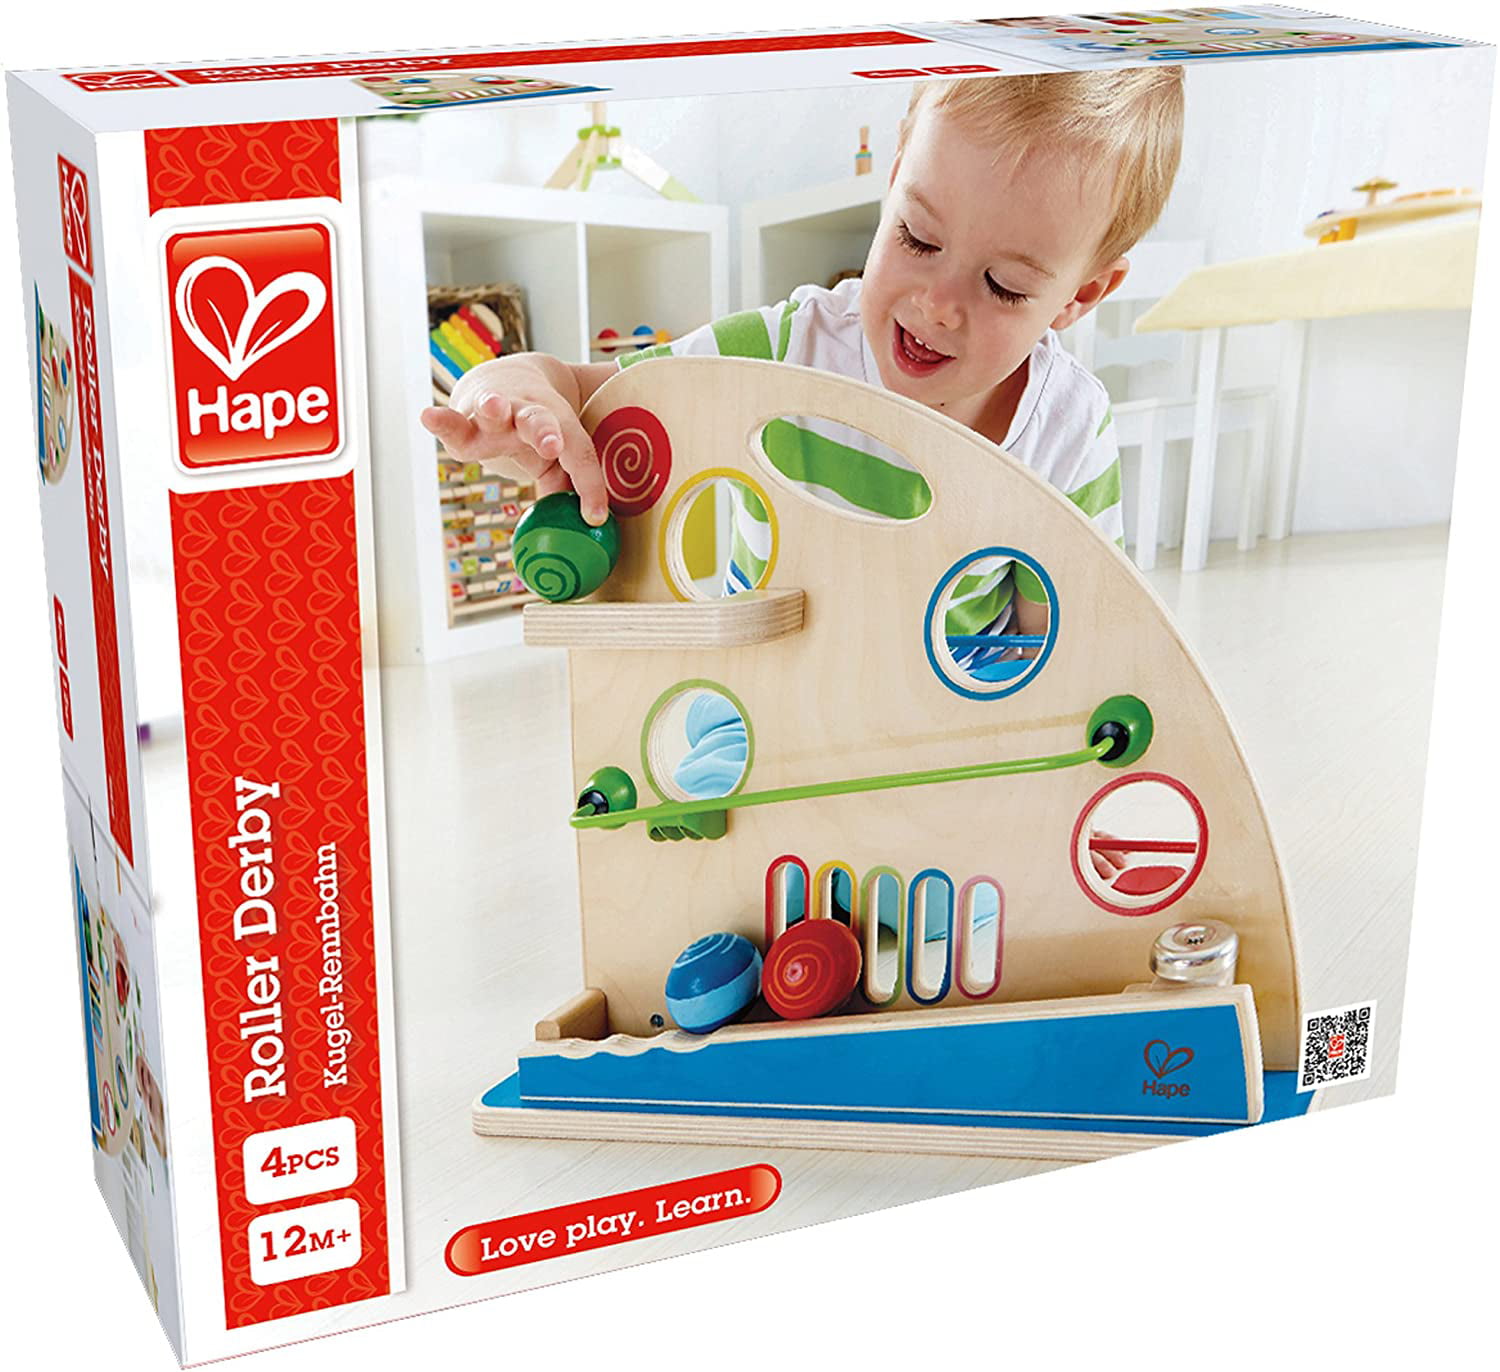 Hape Kids Wooden Colorful 2 Sided Roller Derby Mountain Racing Learning Game 